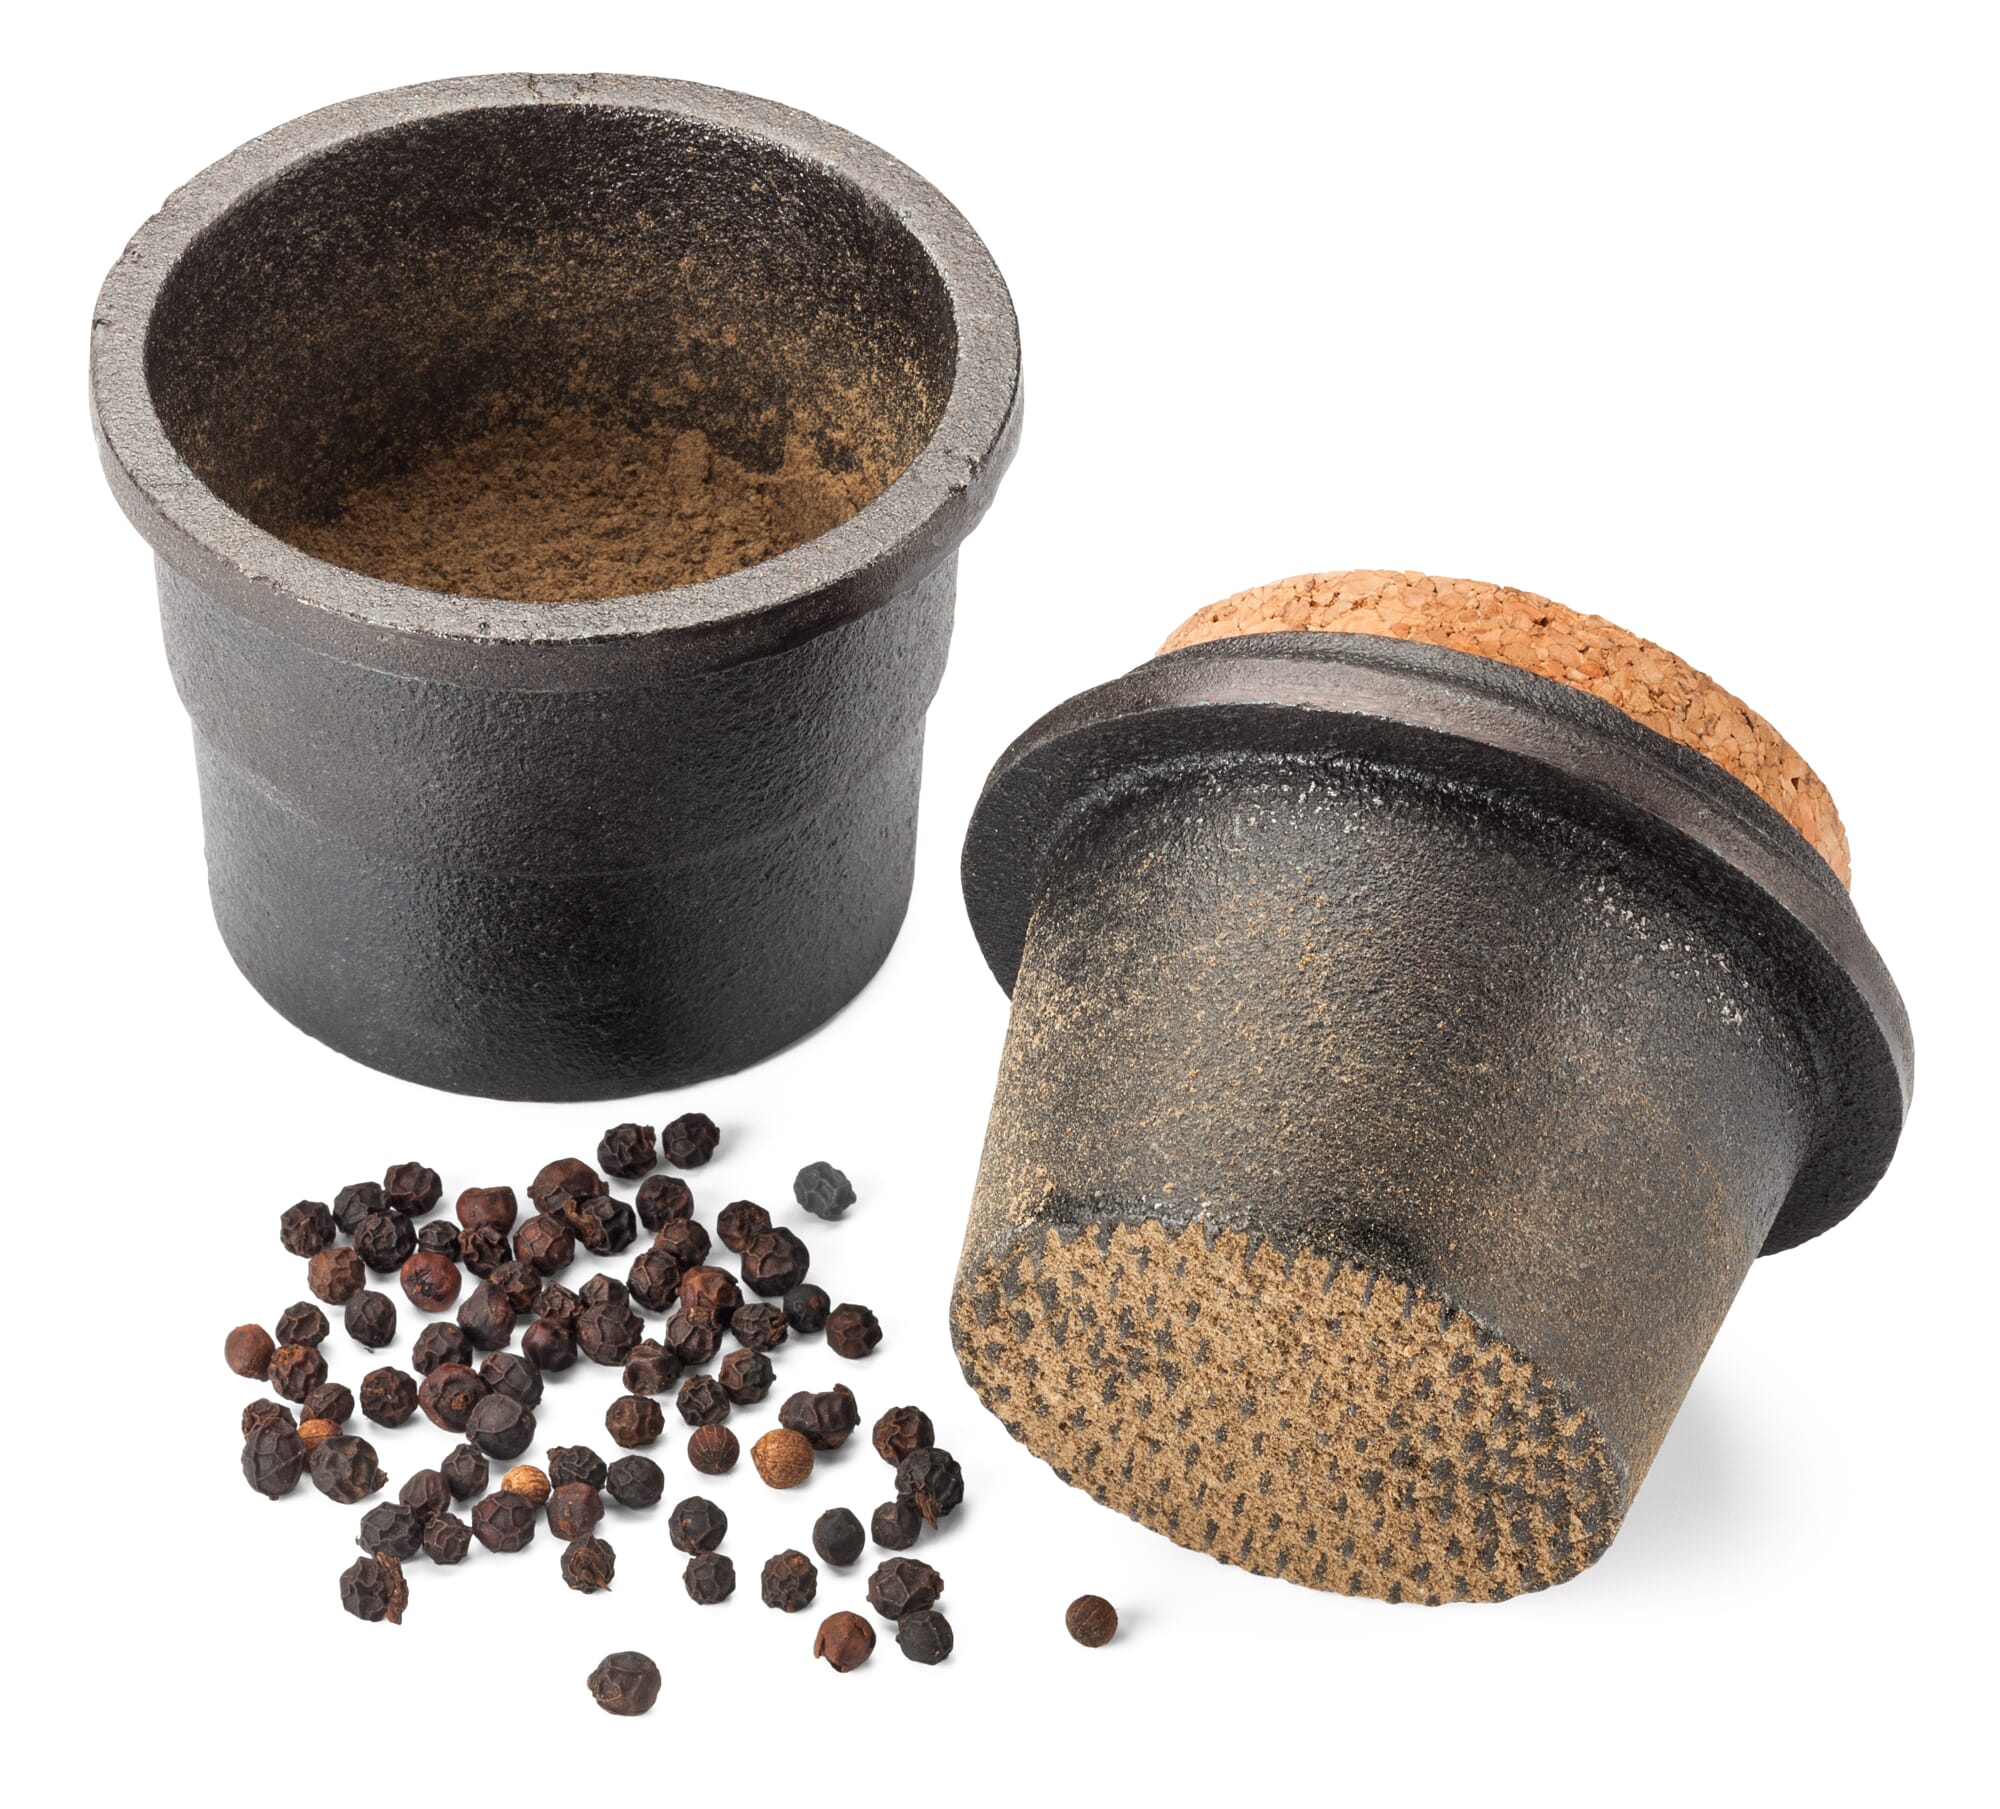 The Anthracite Mill  Quality Cast Iron Salt & Pepper Grinders